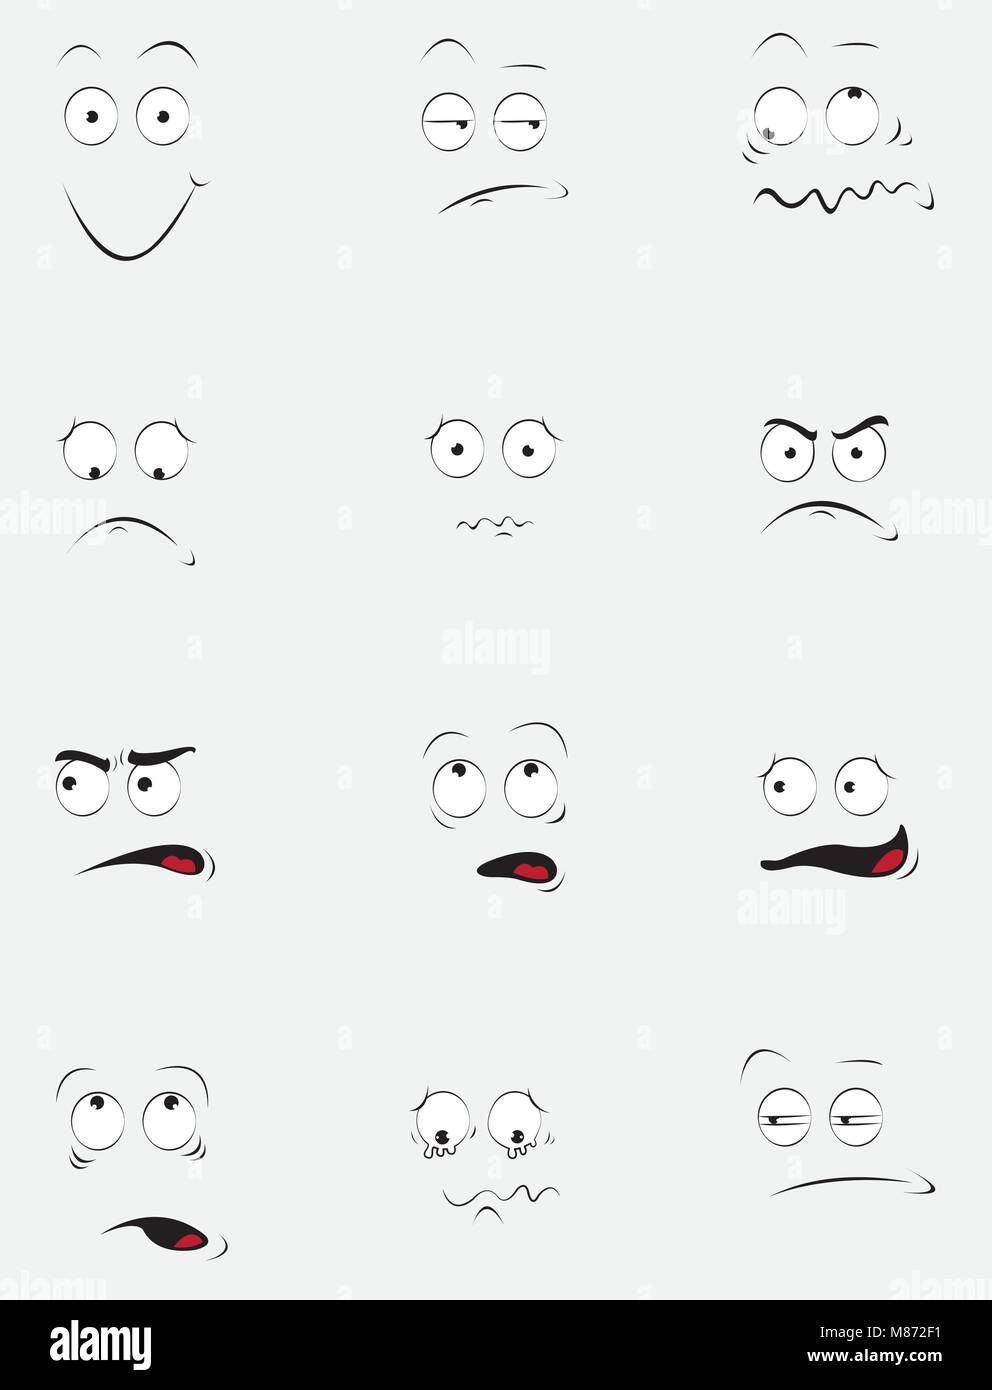 Funny cartoon faces in different poses and feelings Stock Vector